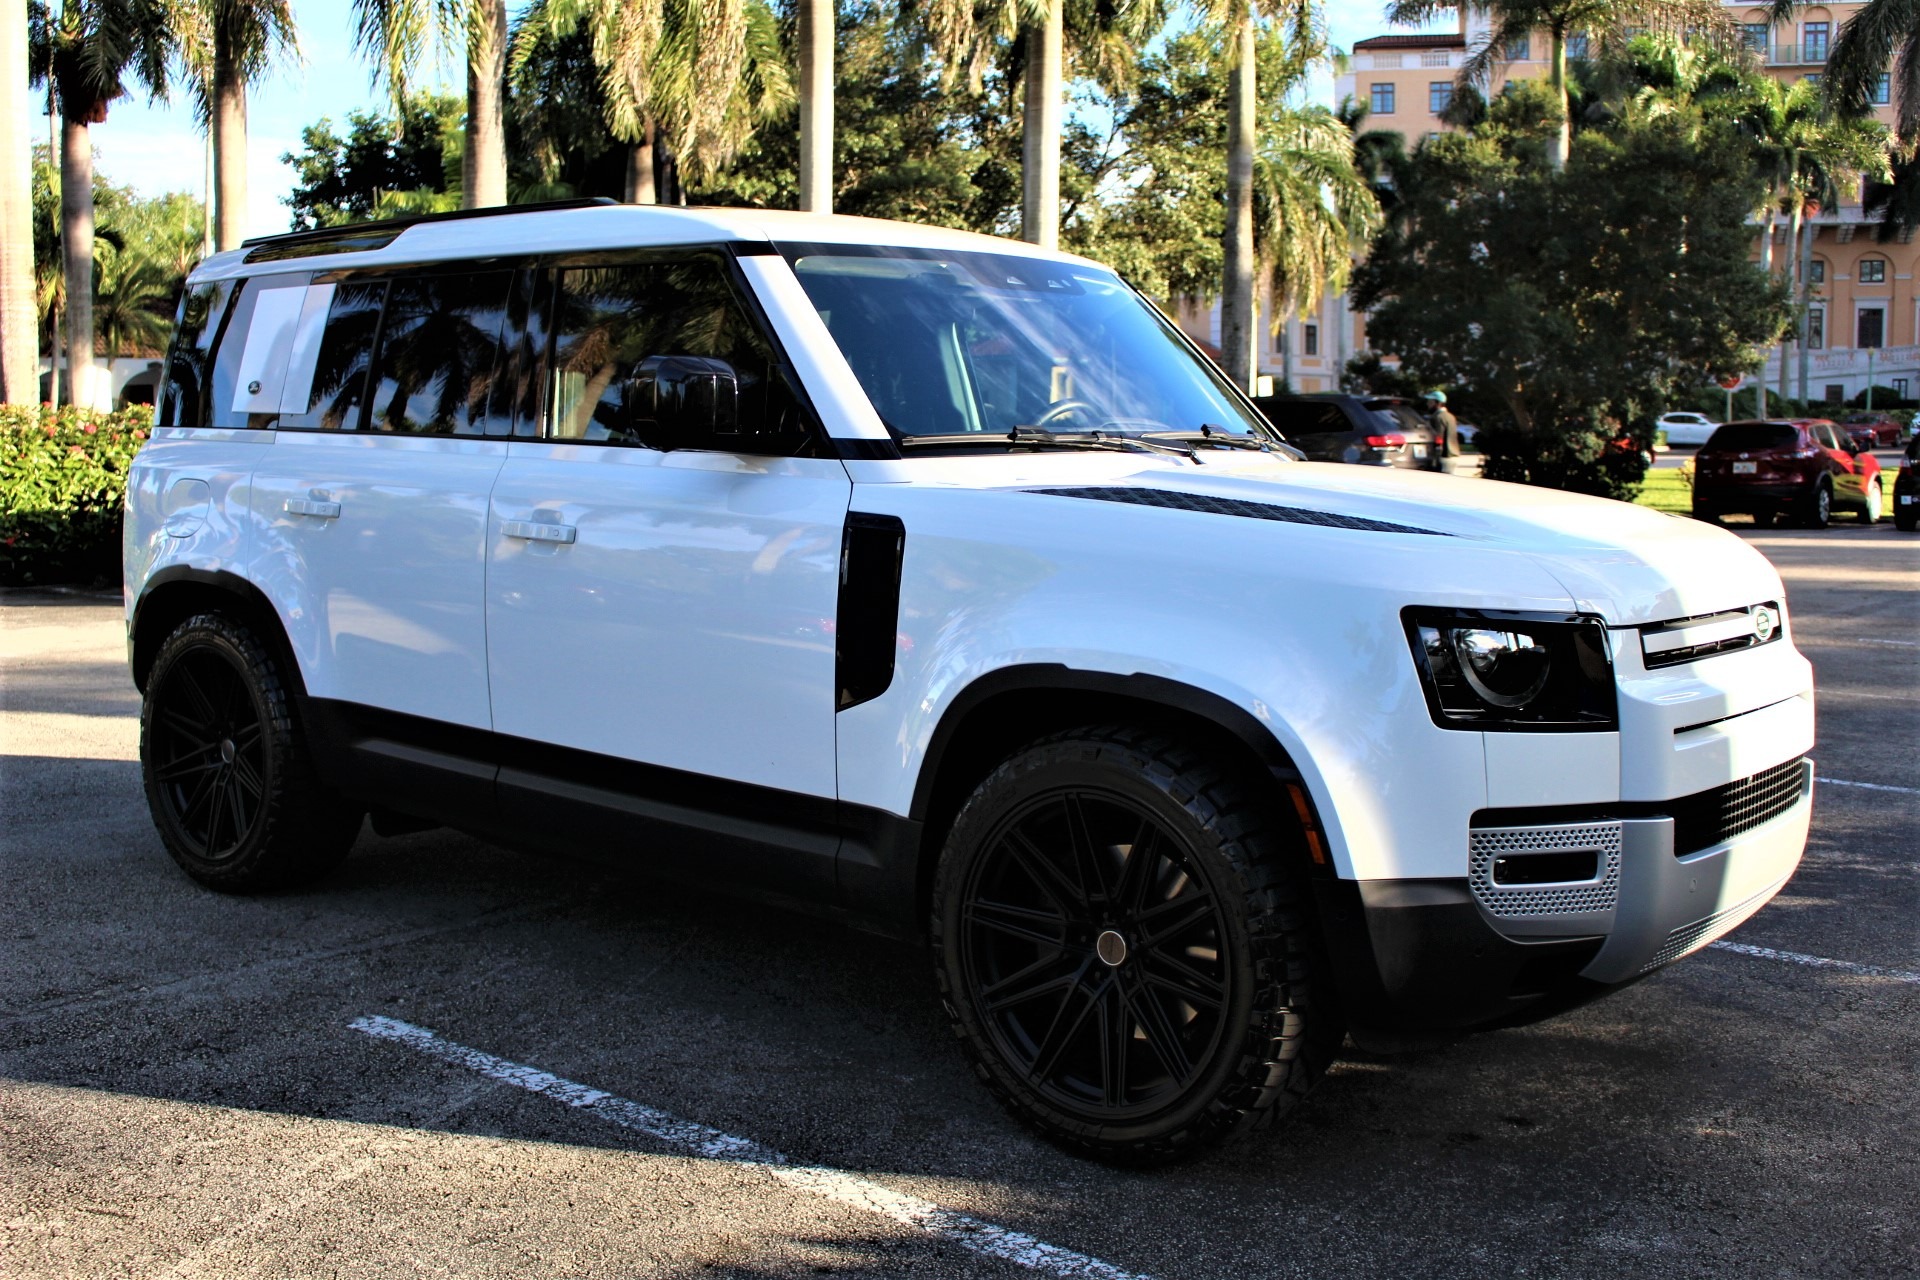 Used 2020 Land Rover Defender 110 SE for sale $93,850 at The Gables Sports Cars in Miami FL 33146 2